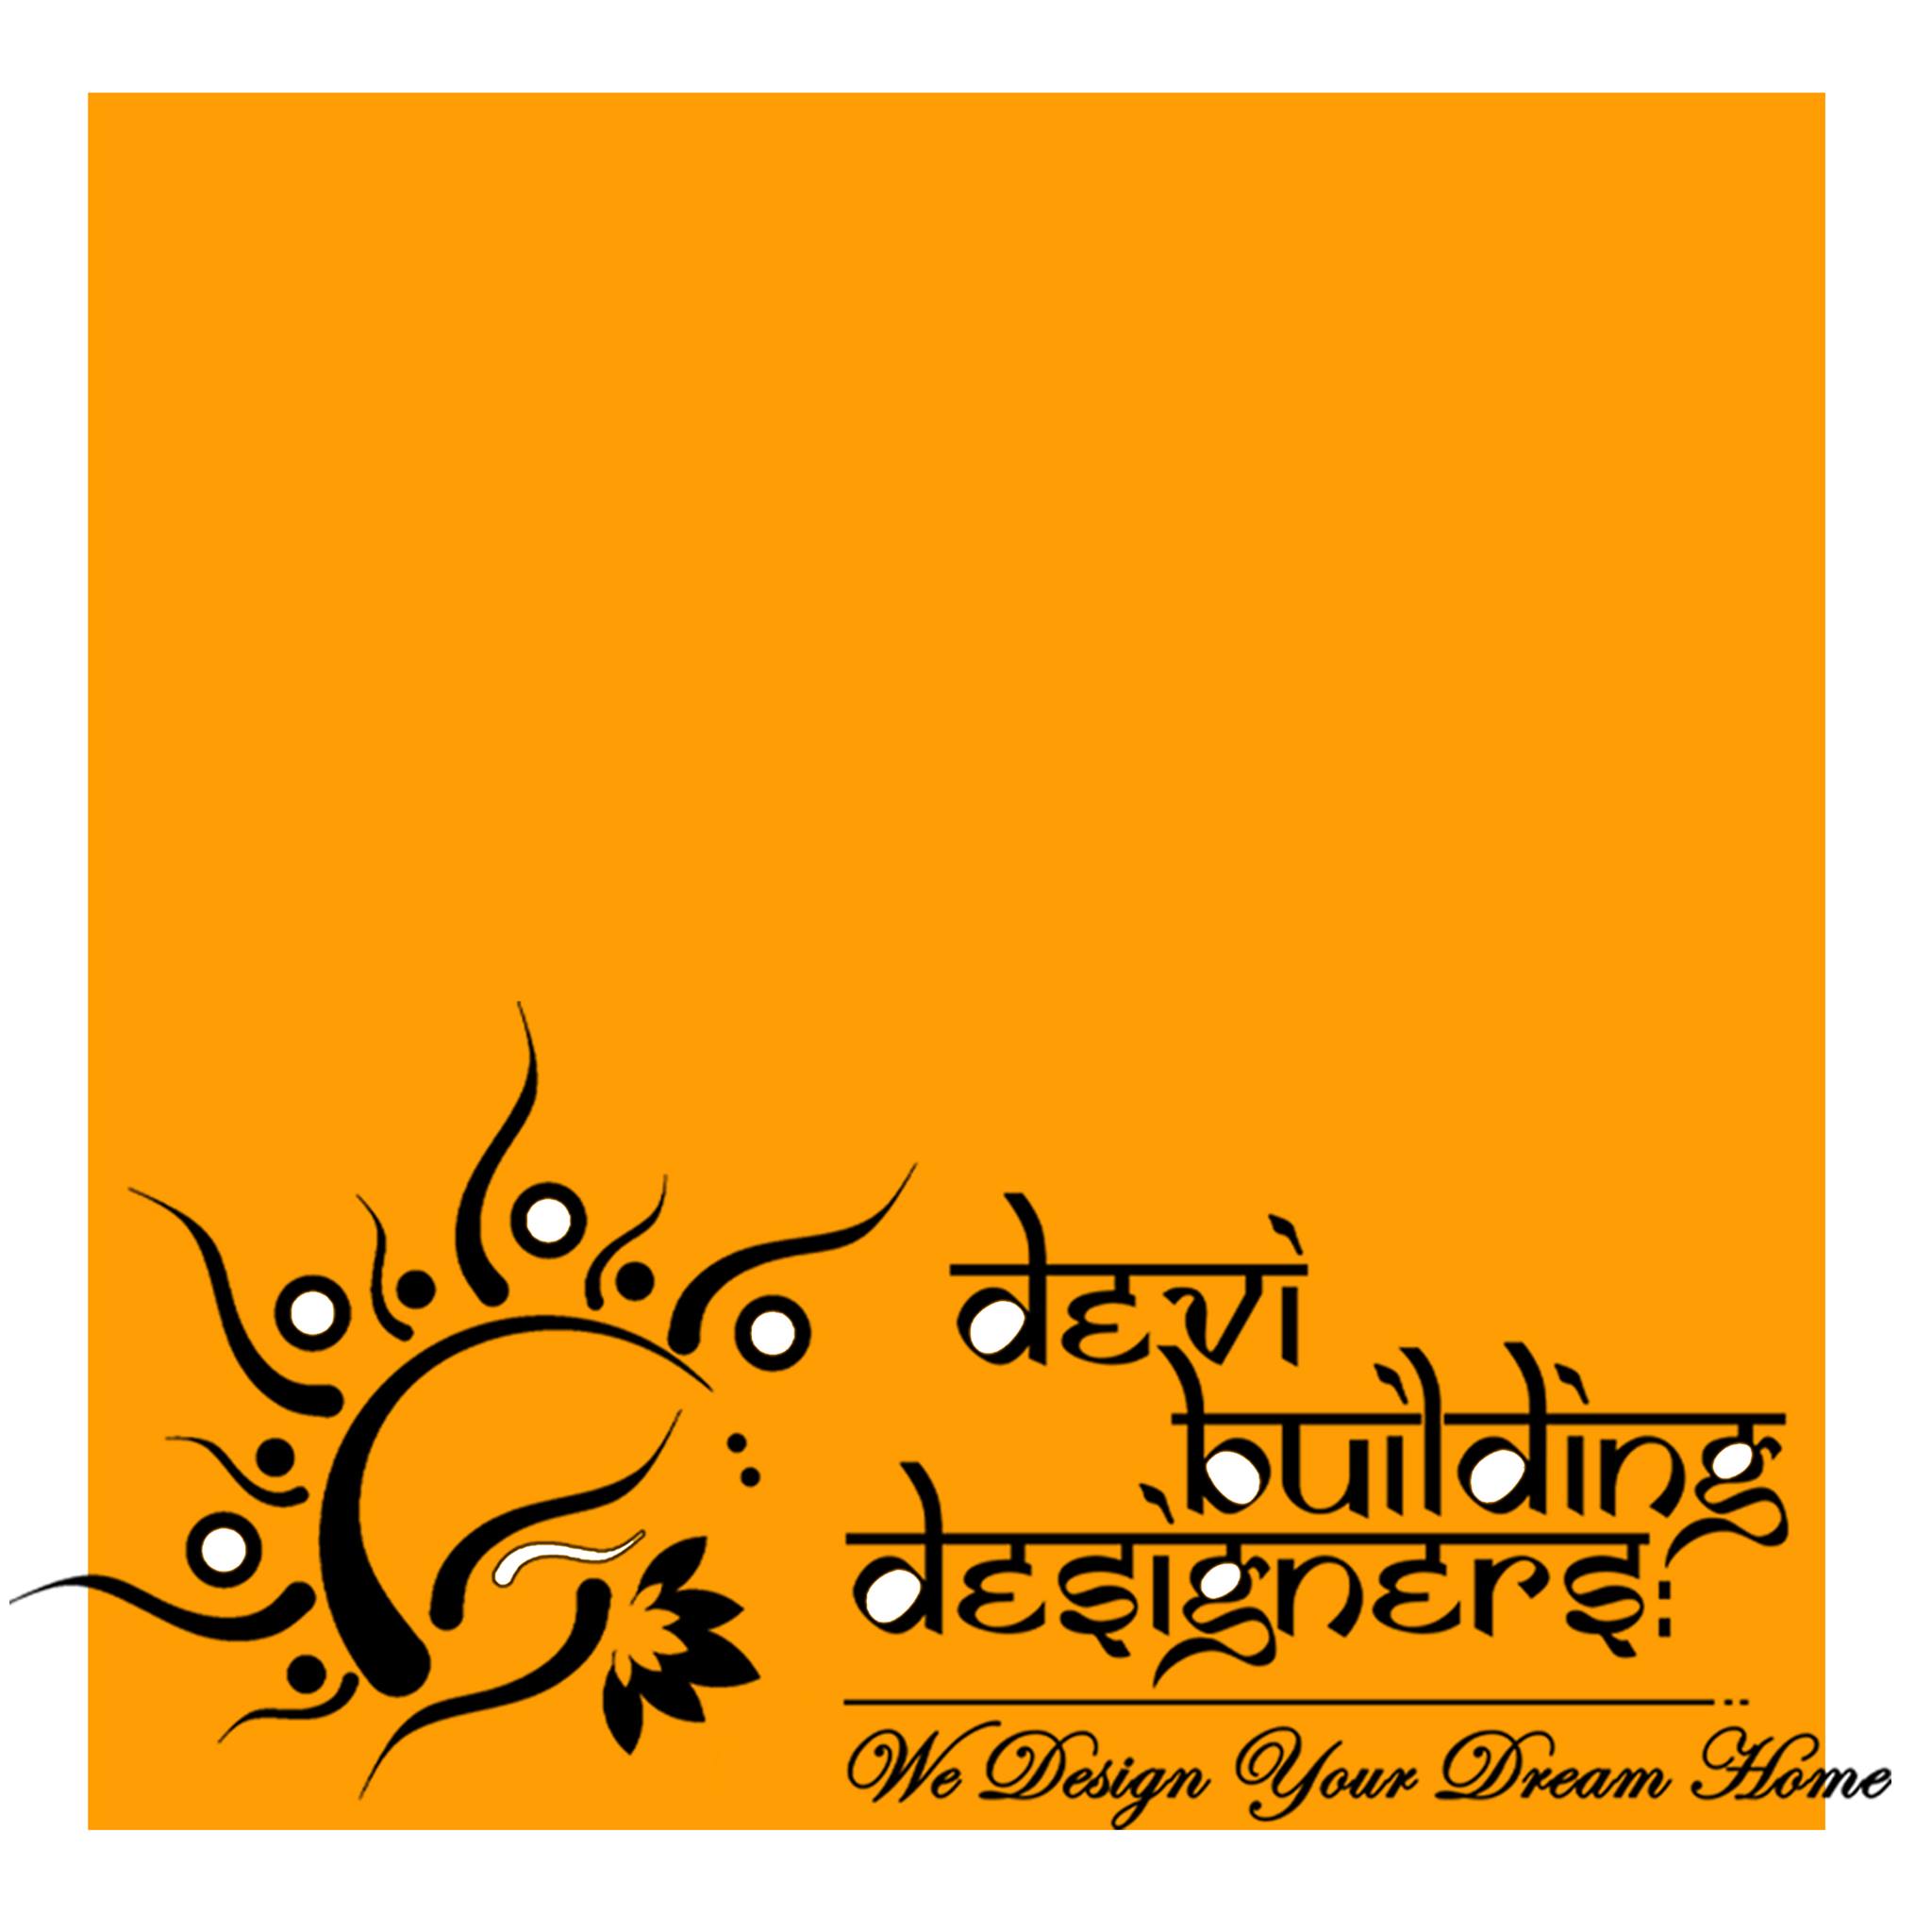 Devi Building Designers|Accounting Services|Professional Services